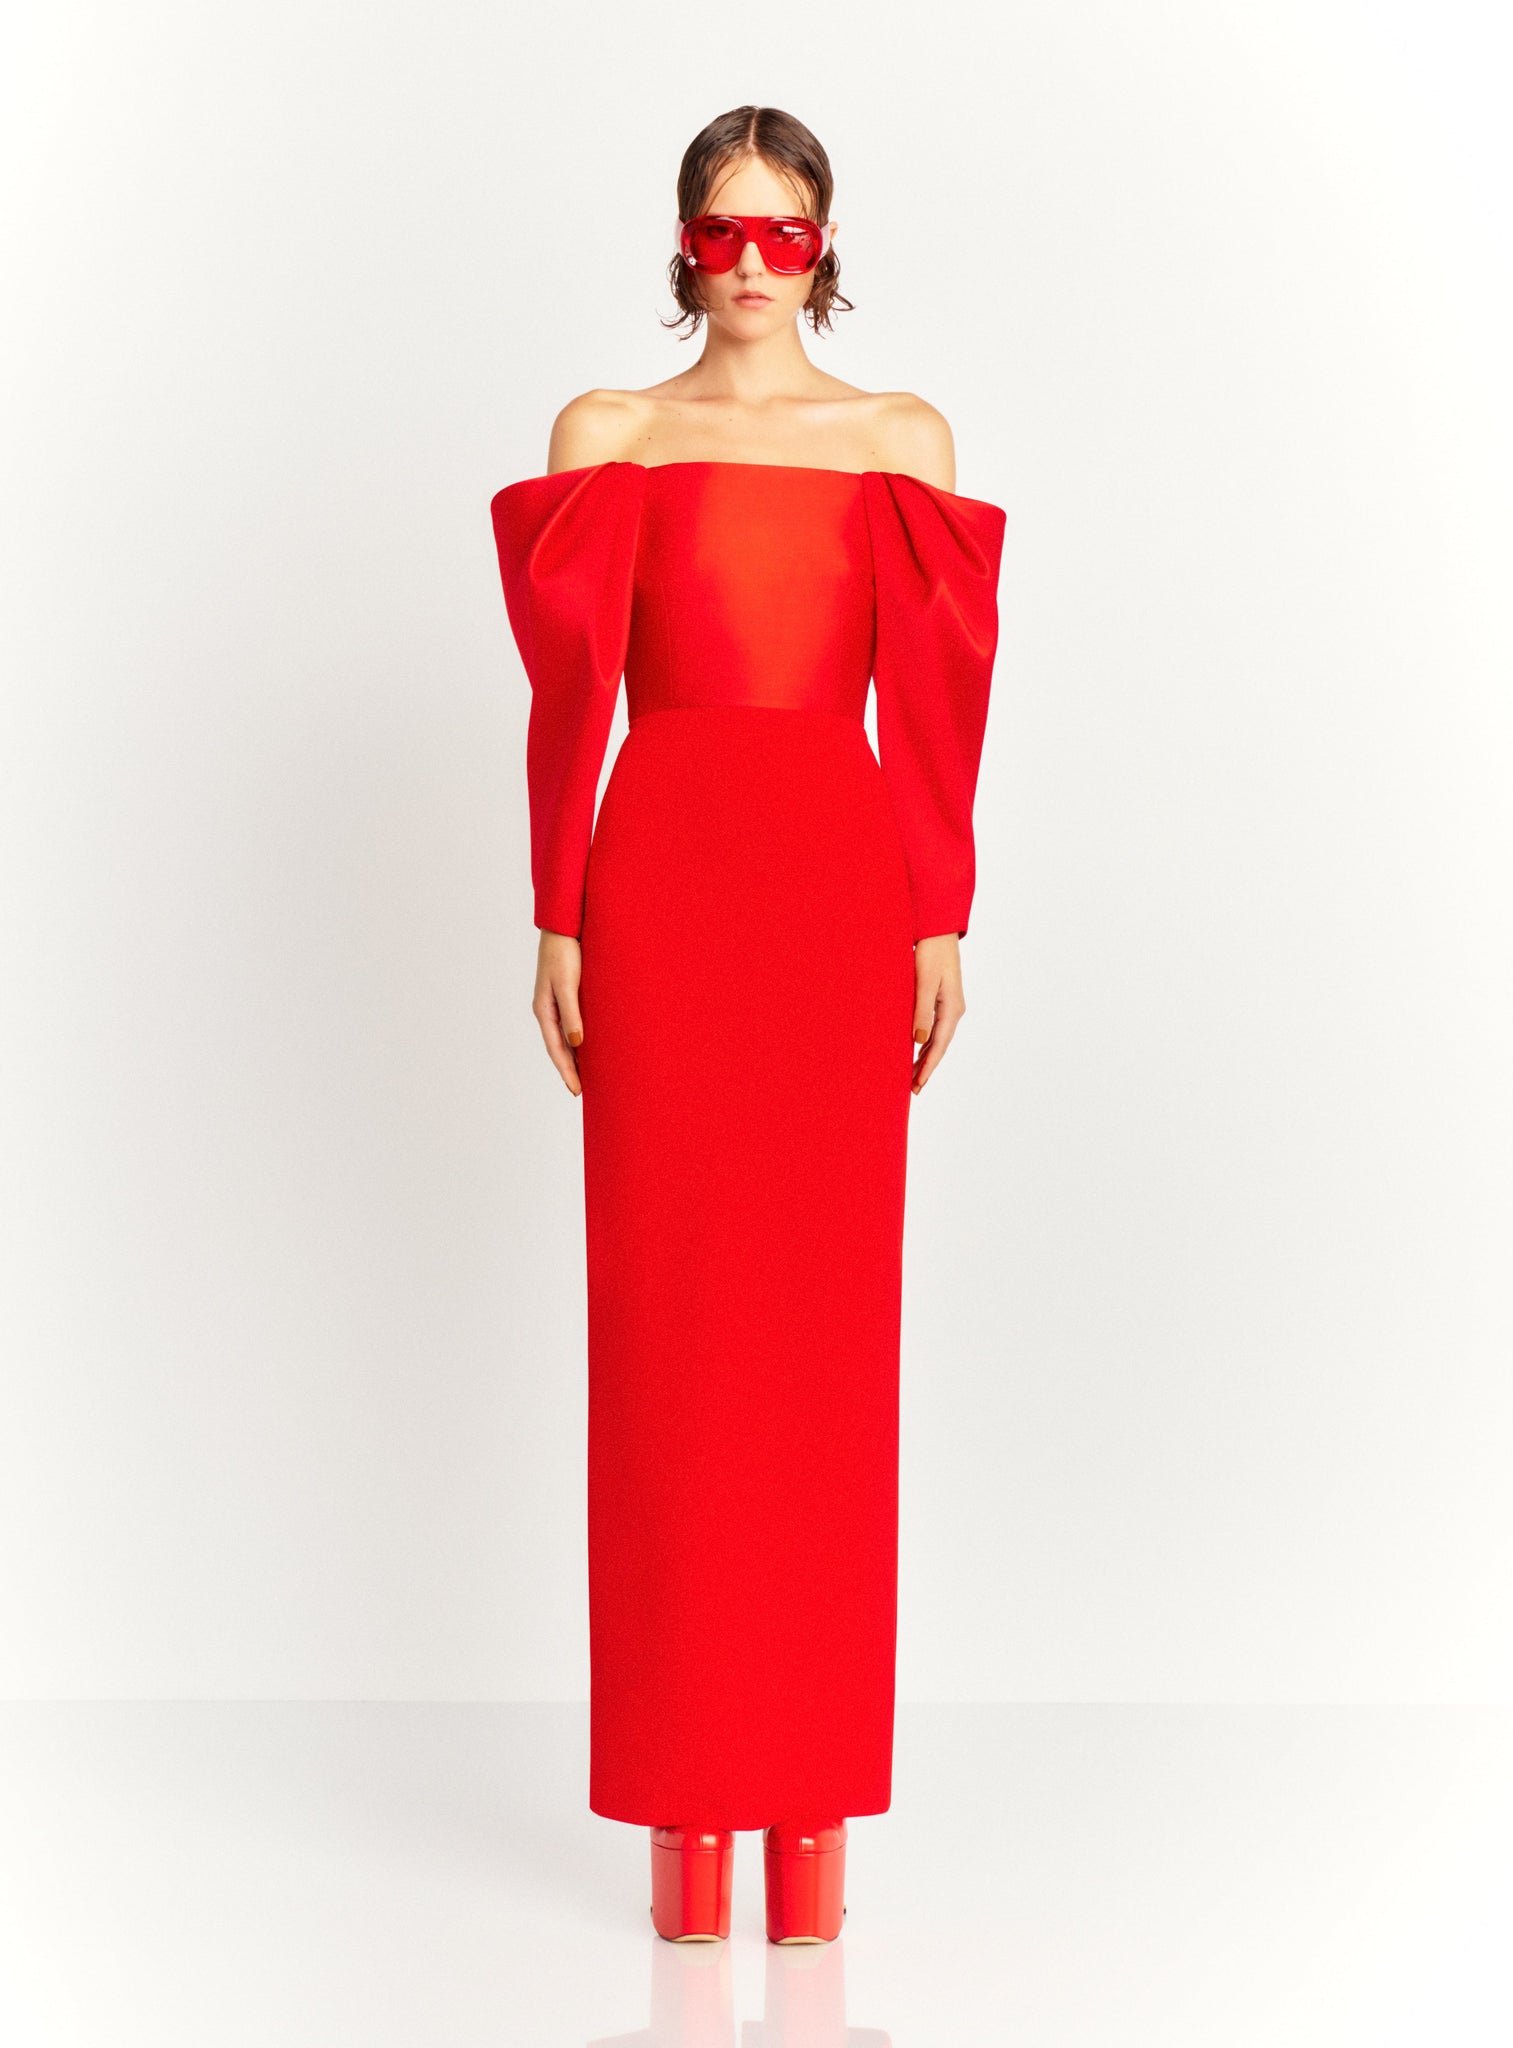 The Melina Maxi Dress in Red